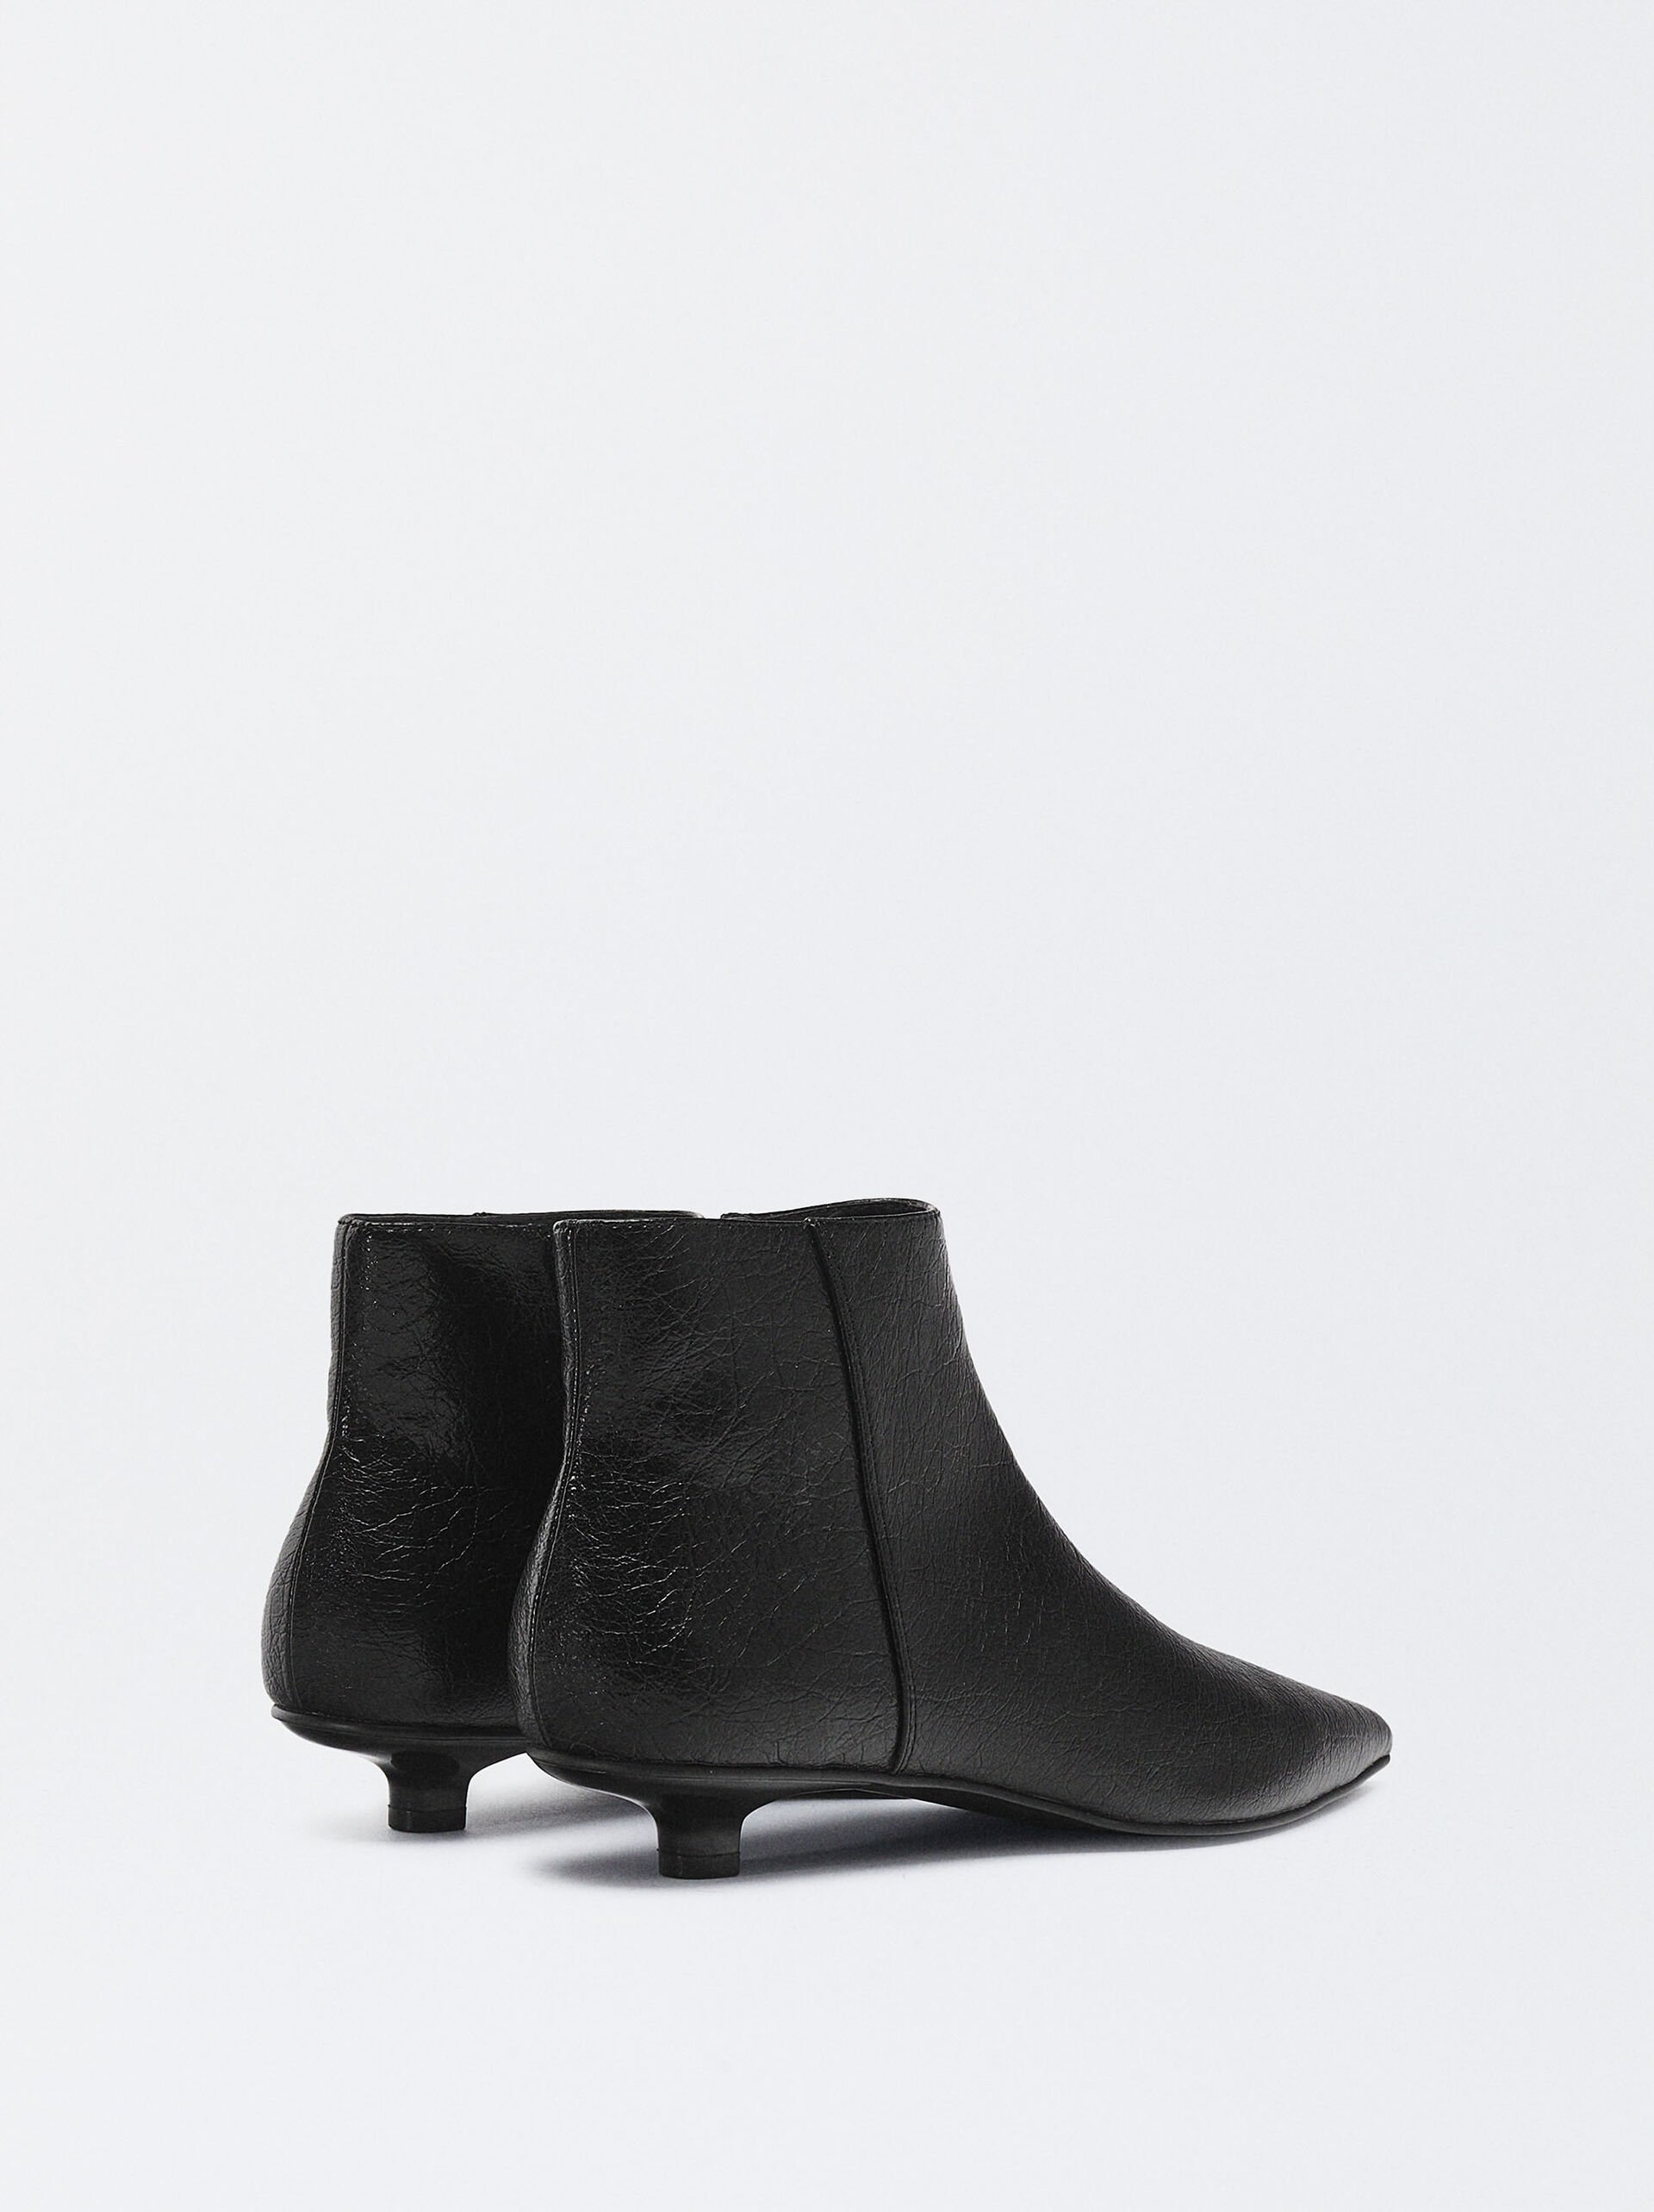 Kitten Heel Ankle Boots image number 4.0